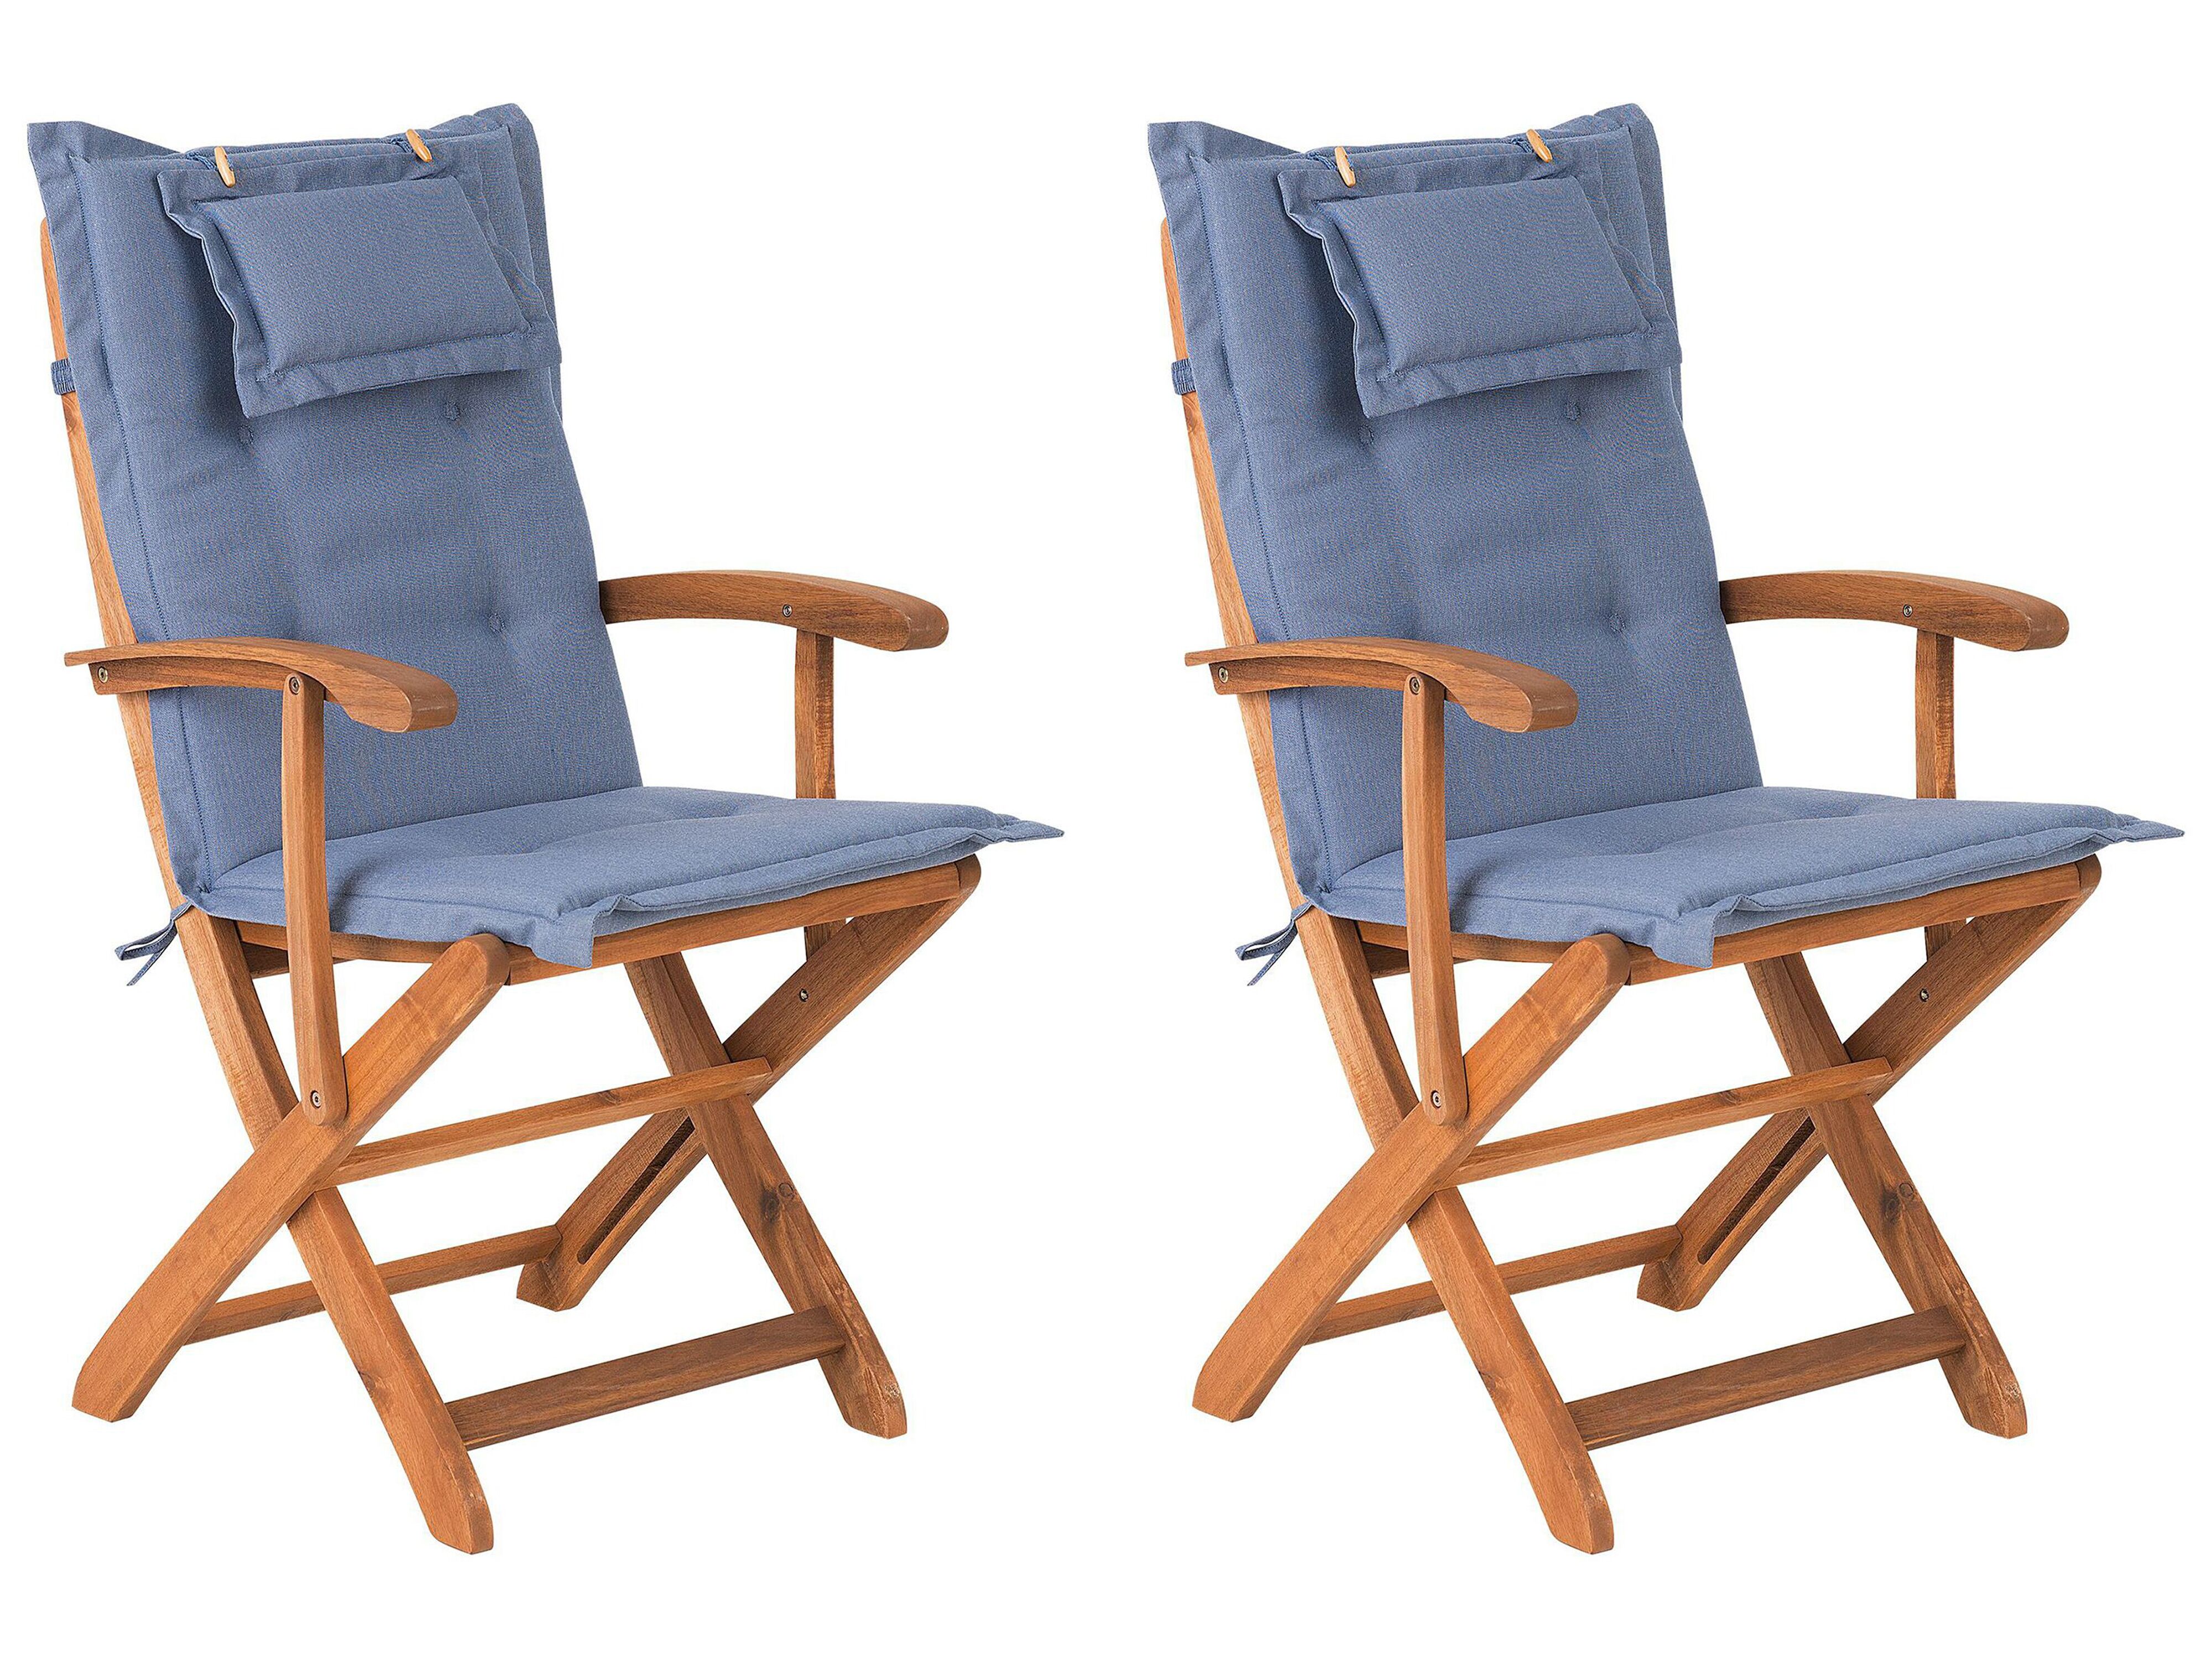 Set of 2 Garden Folding with Chairs MAUI Blue Cushions